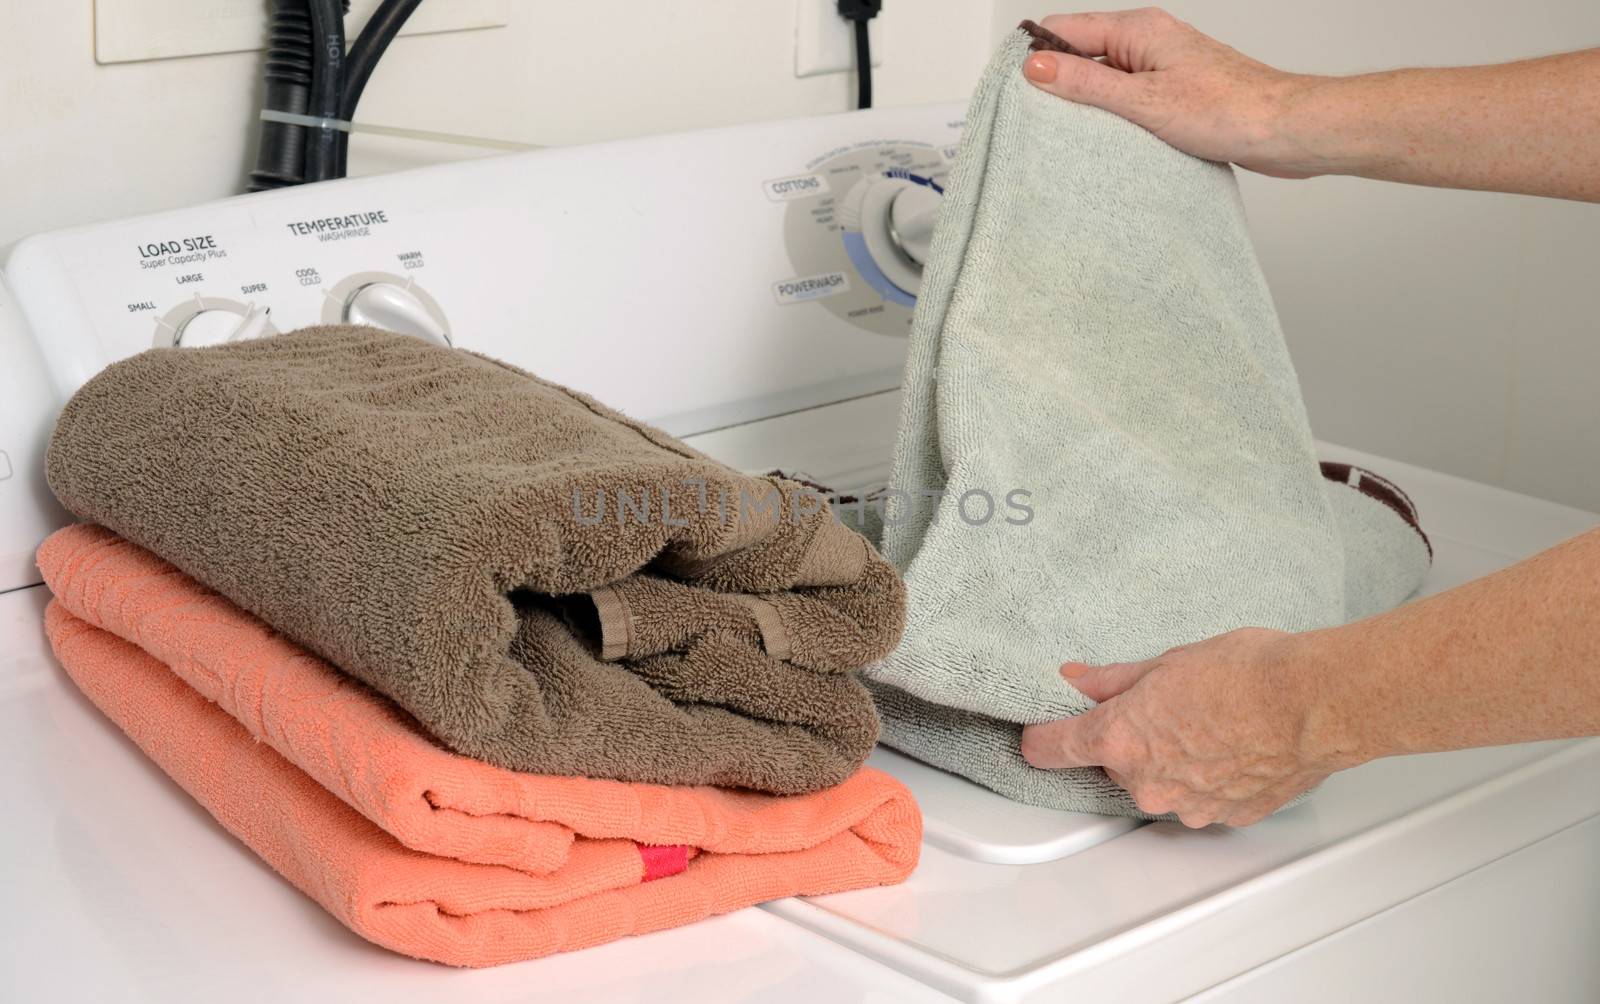 woman doing laundry and folding clean towels near washer and dryer